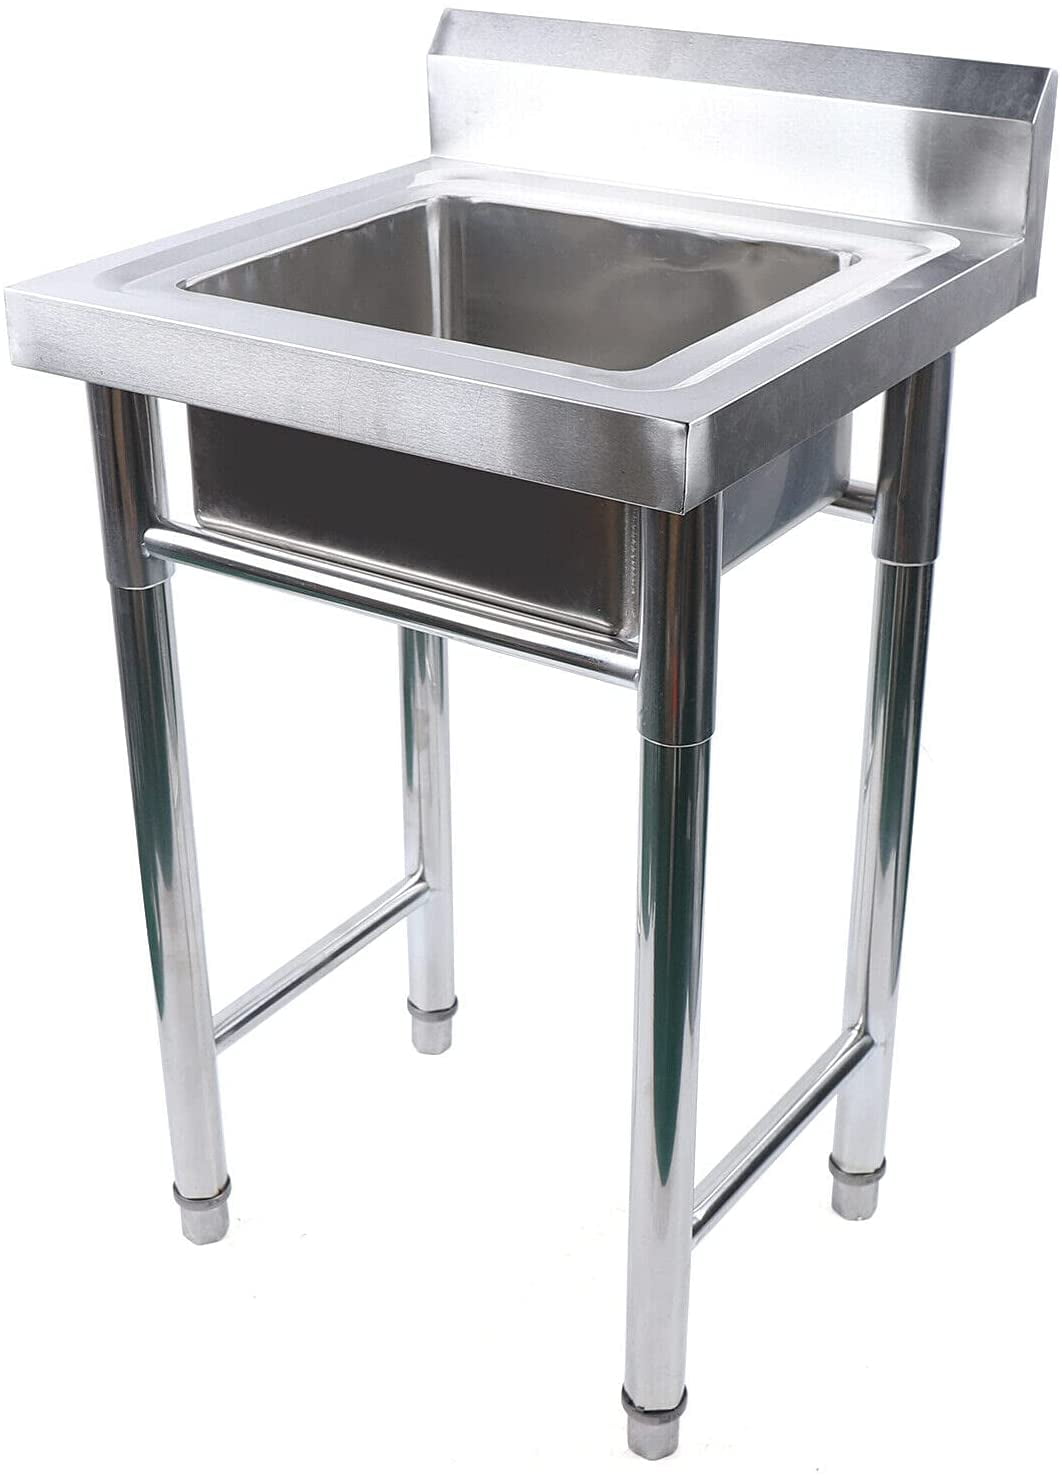 Stainles Steel Kitchen Sink Standing Catering with Bowl Side Platform Commercial 